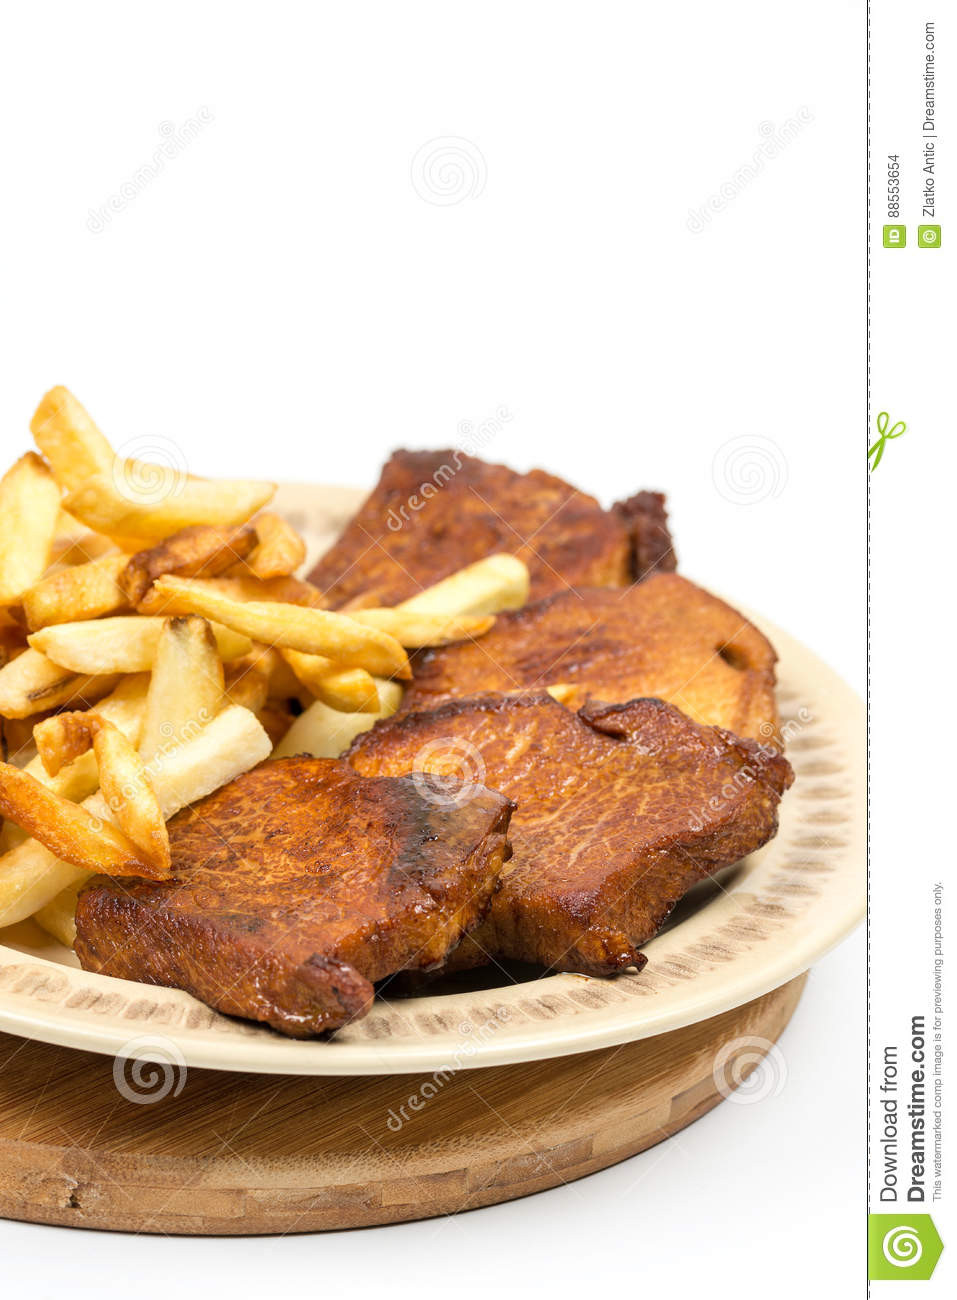 Stewed Pork Chops
 Stewed Pork Chops With French Fries The Plate Stock